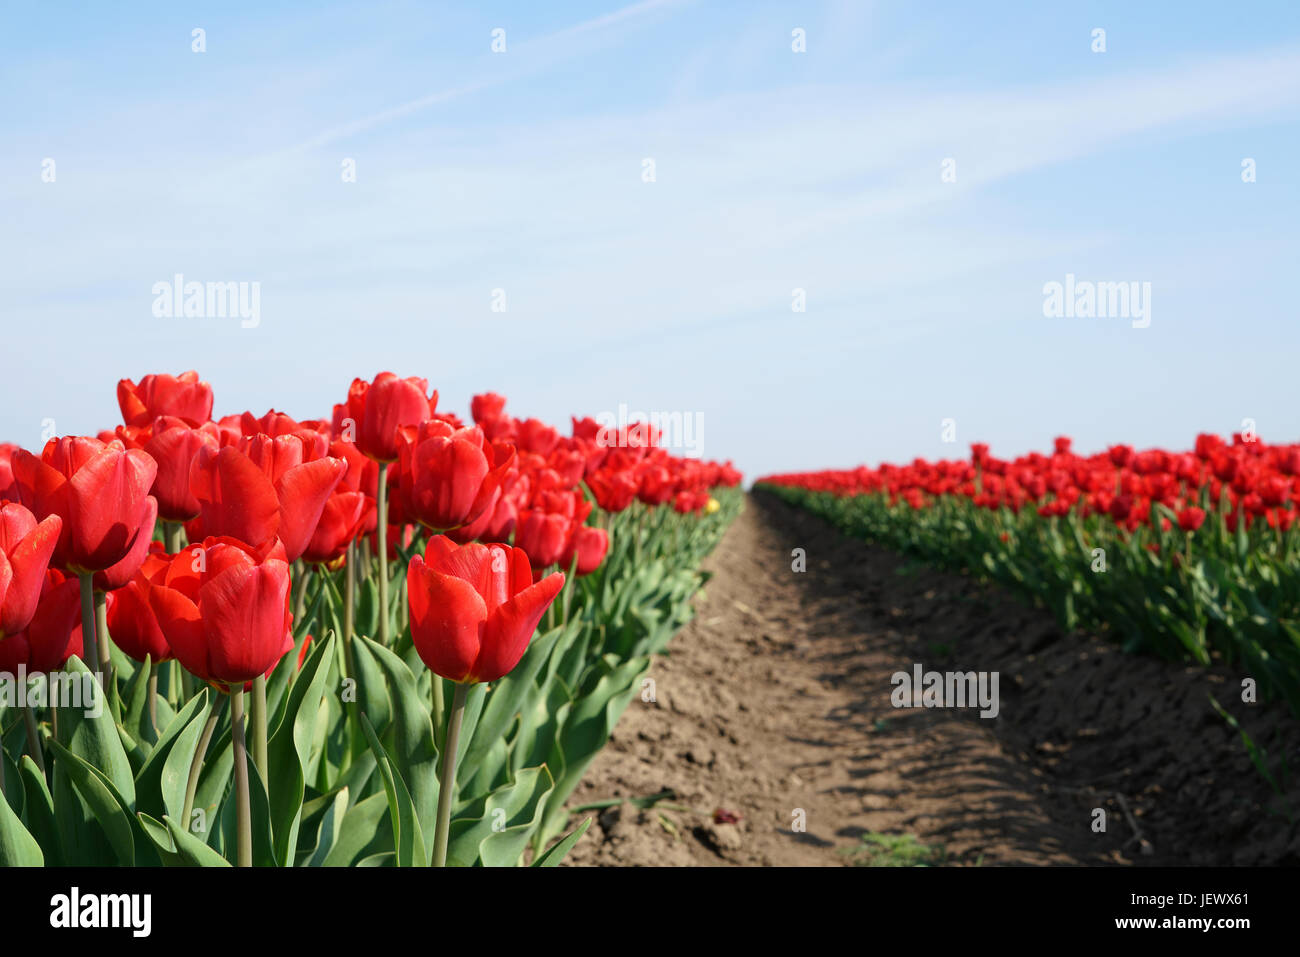 flowering red tulips in a field Stock Photo